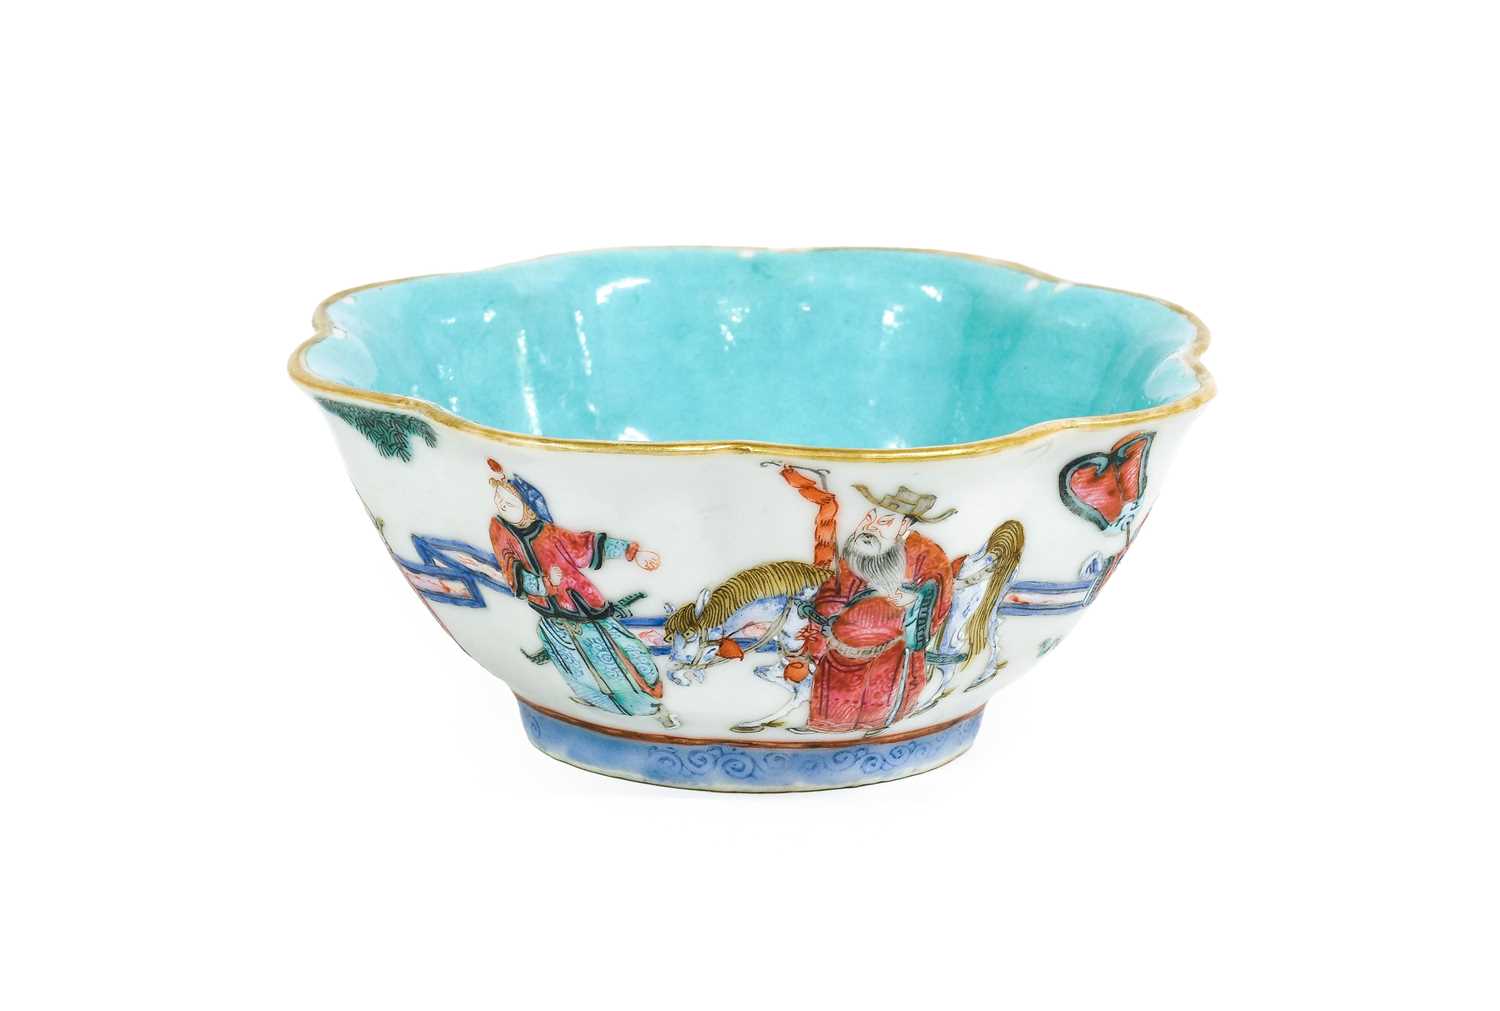 A Chinese Porcelain Bowl, Yongzheng reign mark but 19th century, lobed form and painted in famille